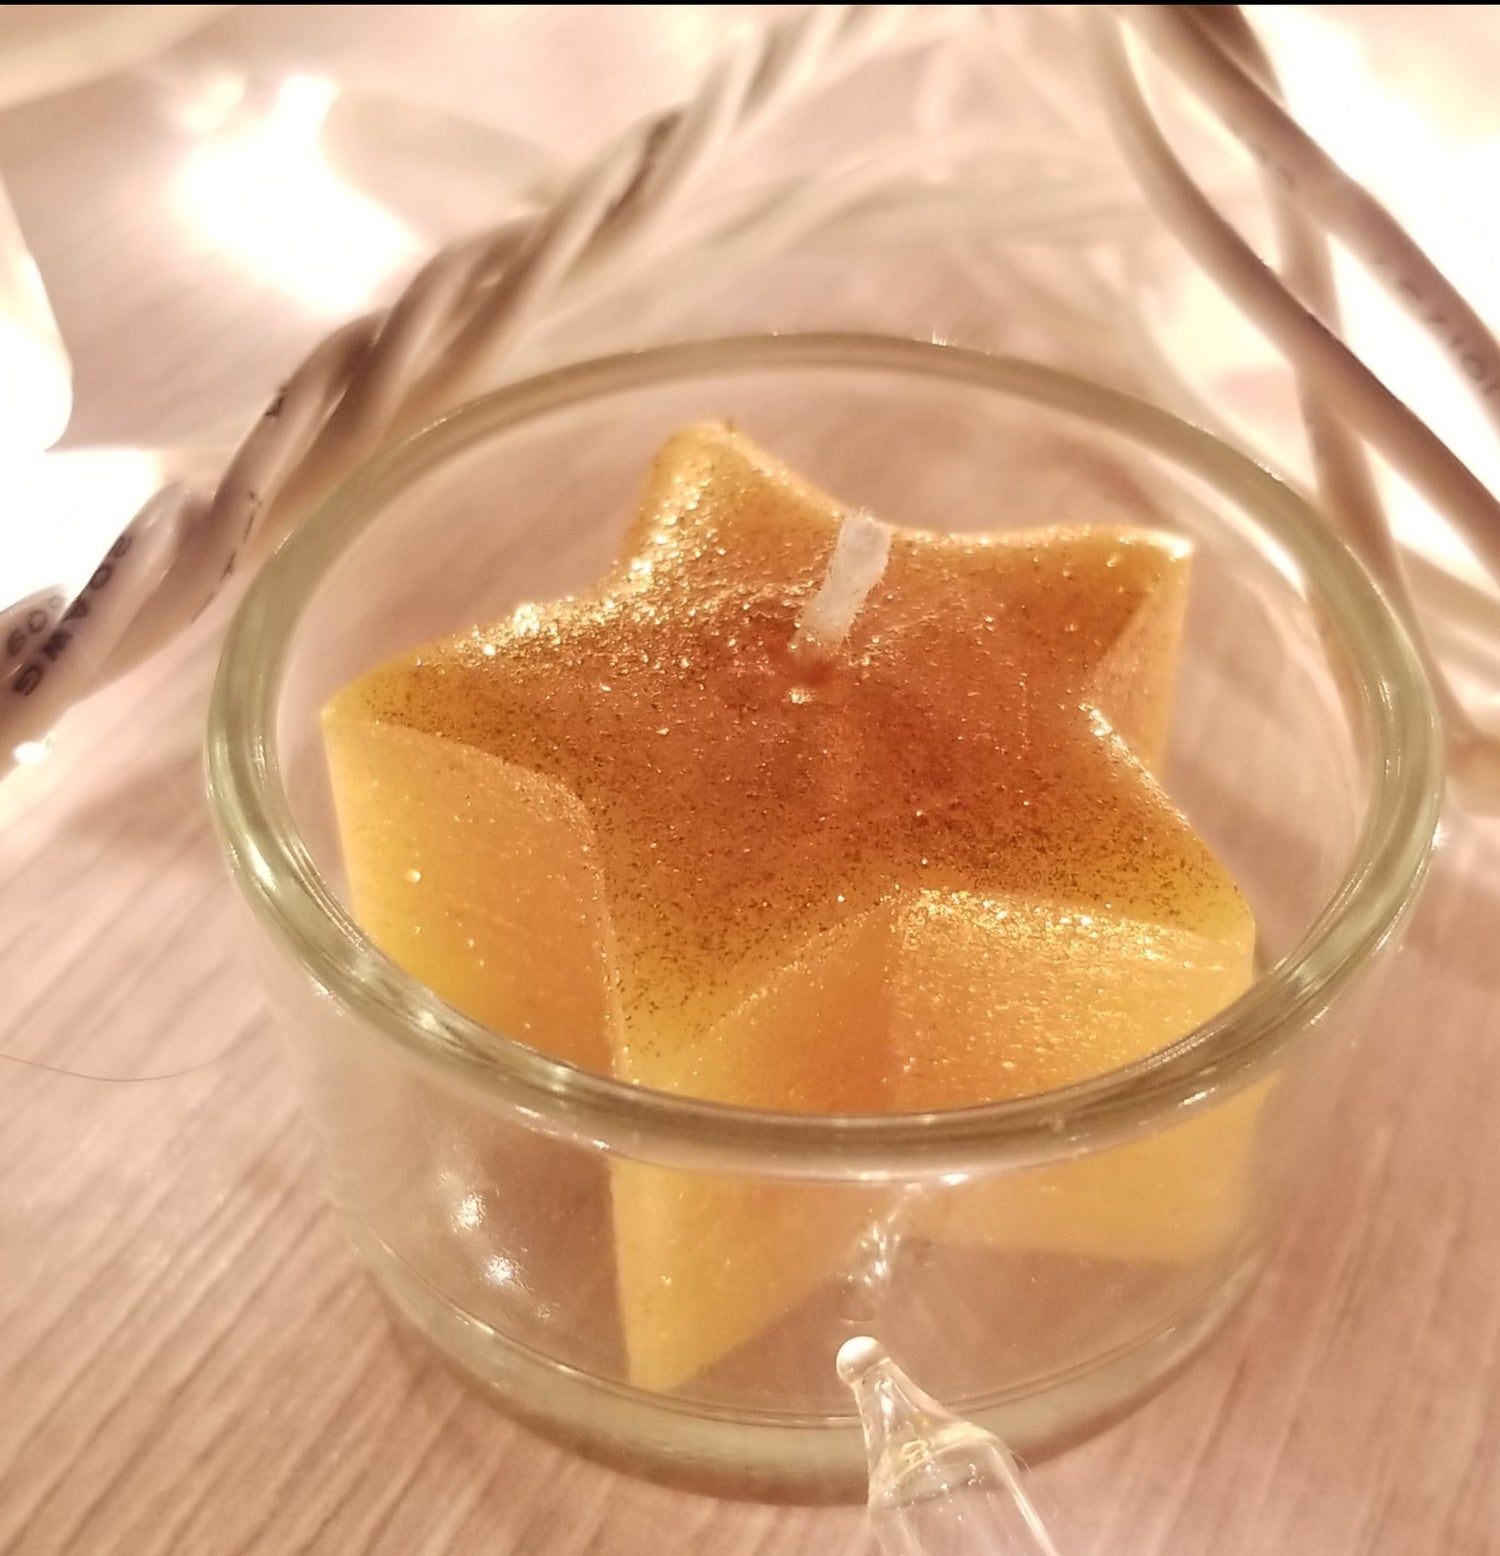 Sparkly star candle